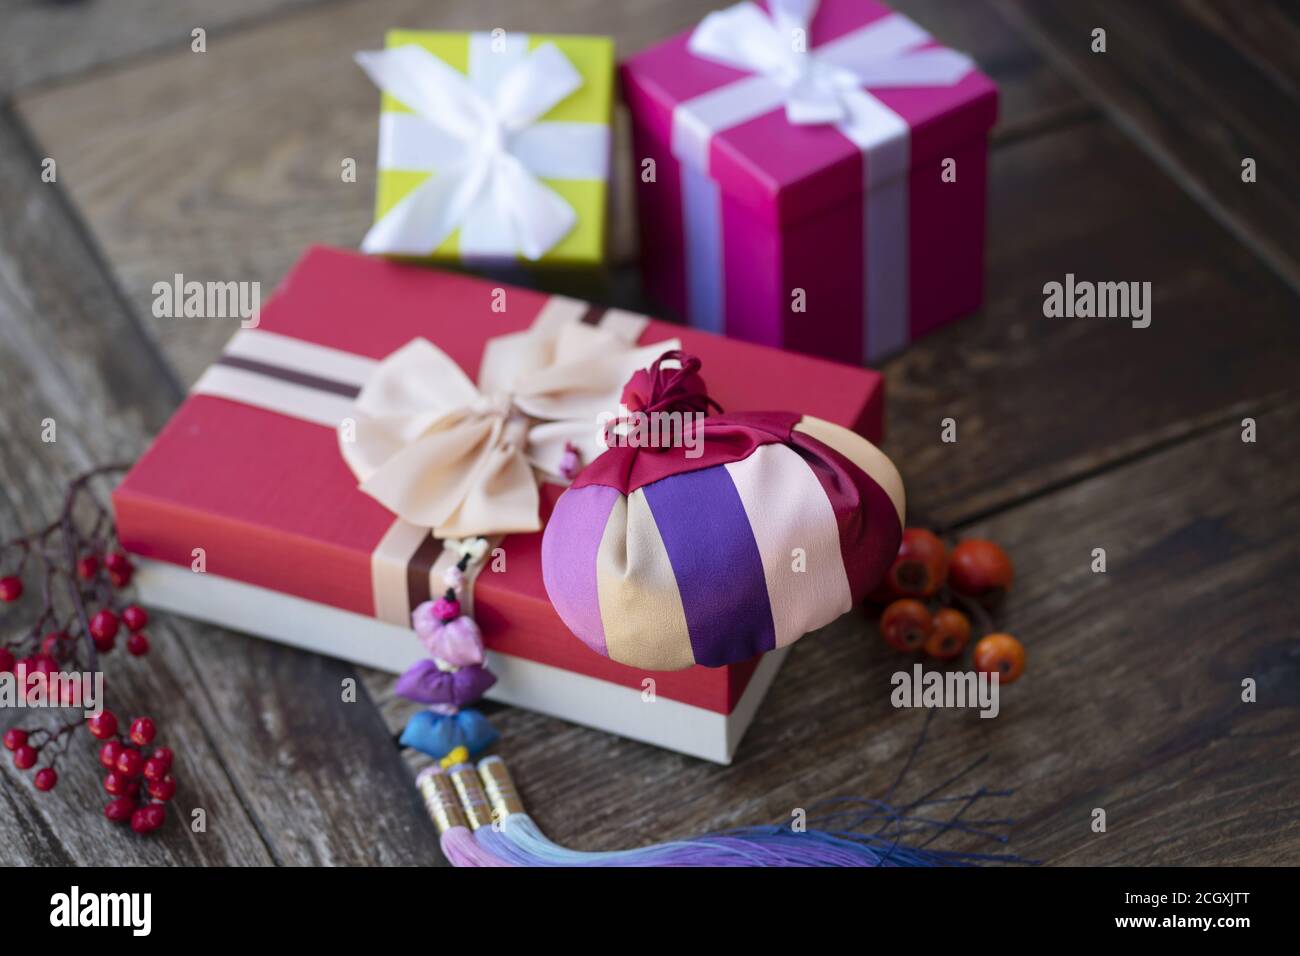 Happy new year's image of Korea, lucky bag and gift boxes Stock Photo